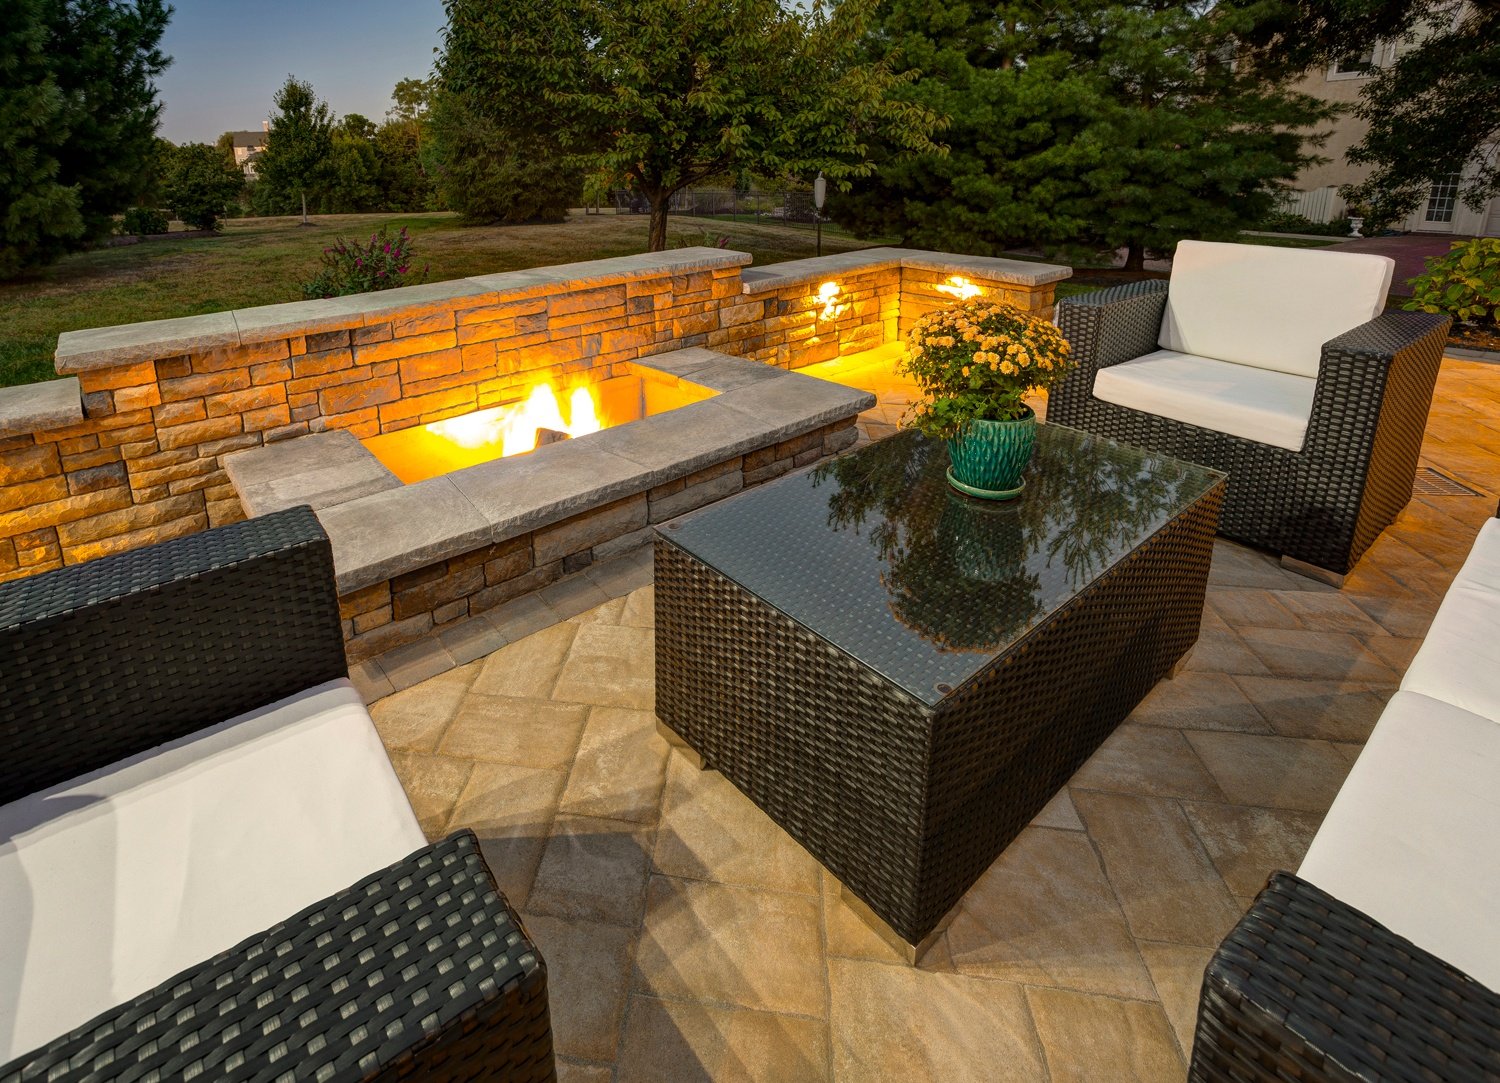 A patio with wicker furniture and a fire pit for outdoor relaxation.